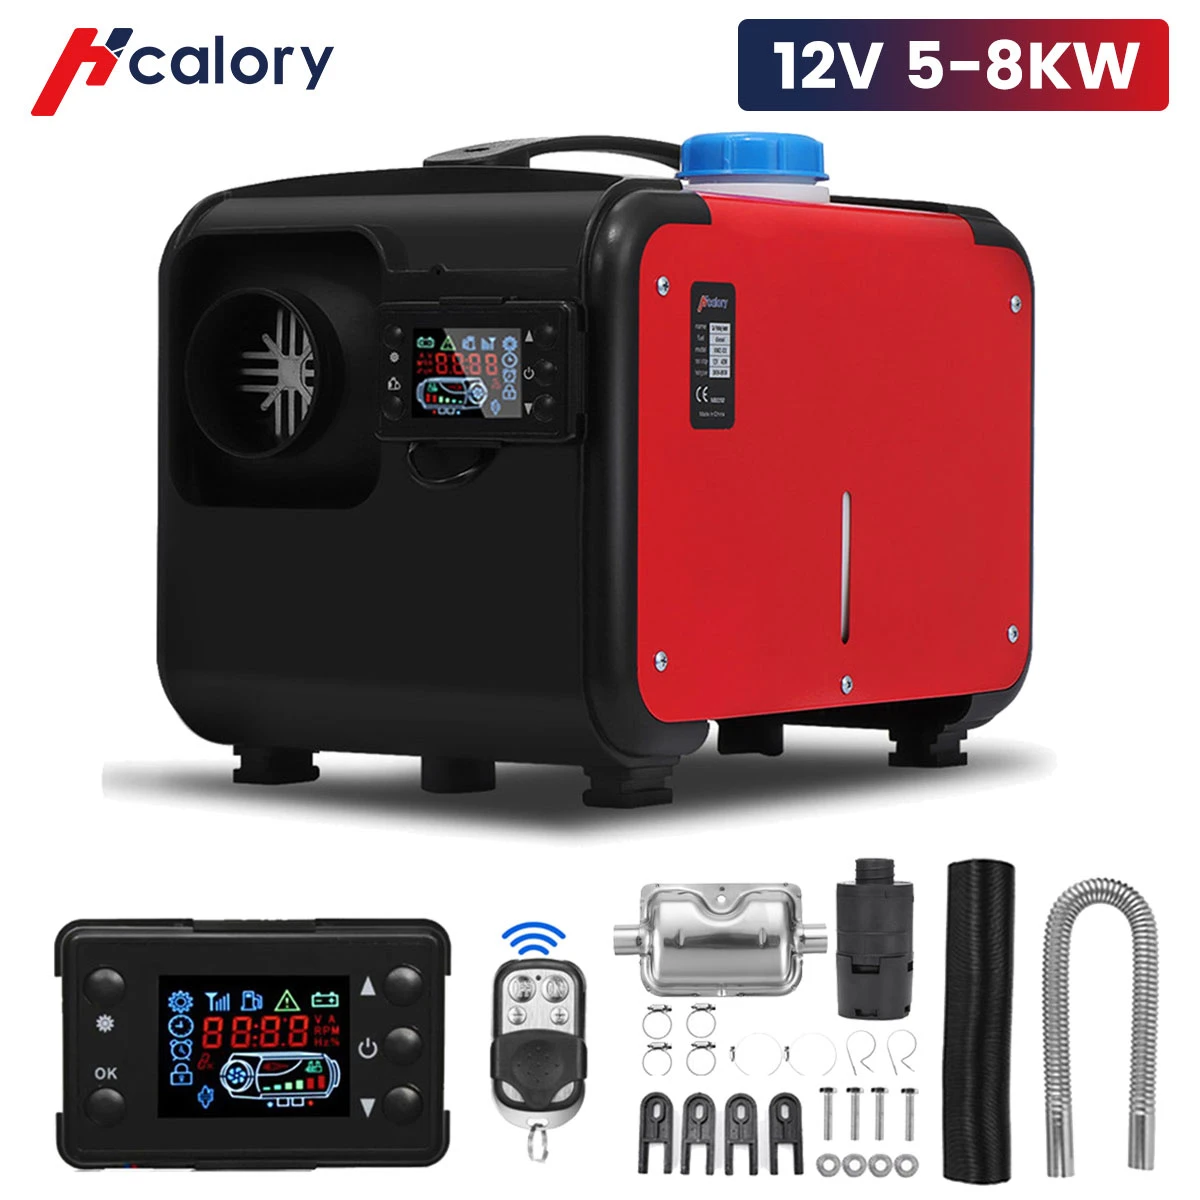 Hcalory 12V 2/ 8KW Car Heater All in One Heating Diesel Air Heater One Hole LCD Monitor Parking Warmer Quick Heat For Truck Bus